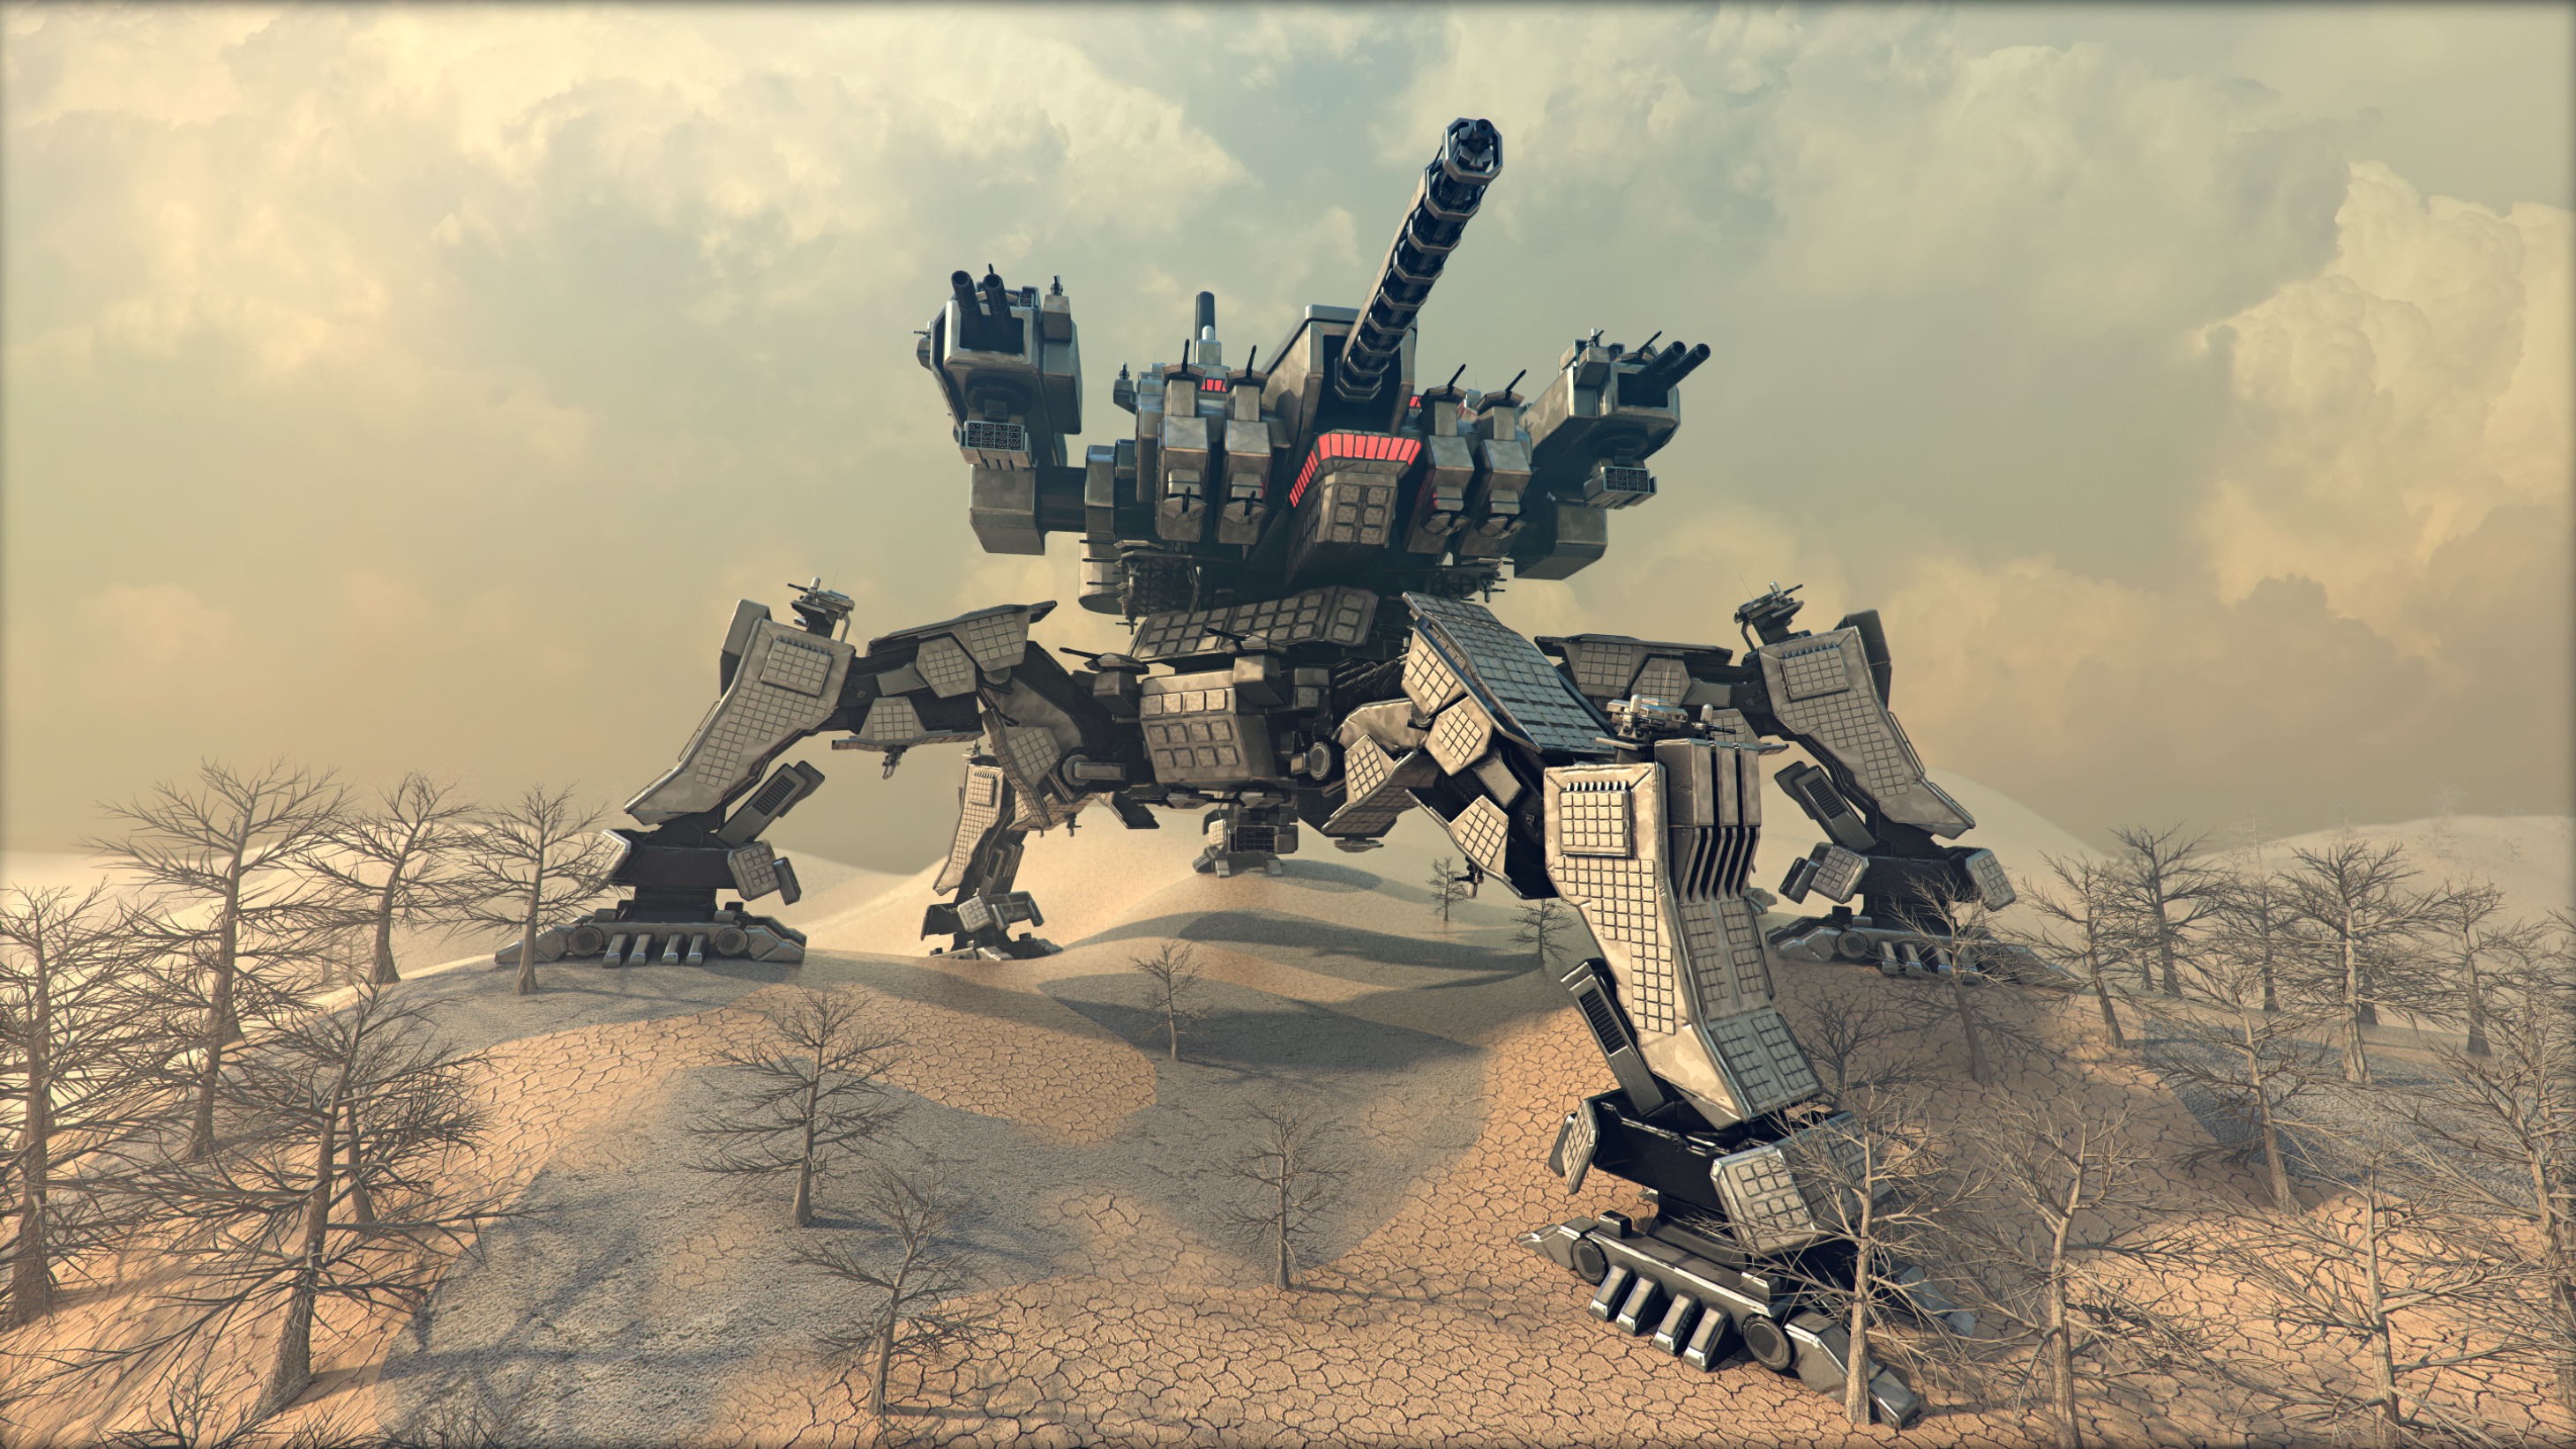 spartan_mobile_fortress_by_avitus12-d5w61sw.jpg